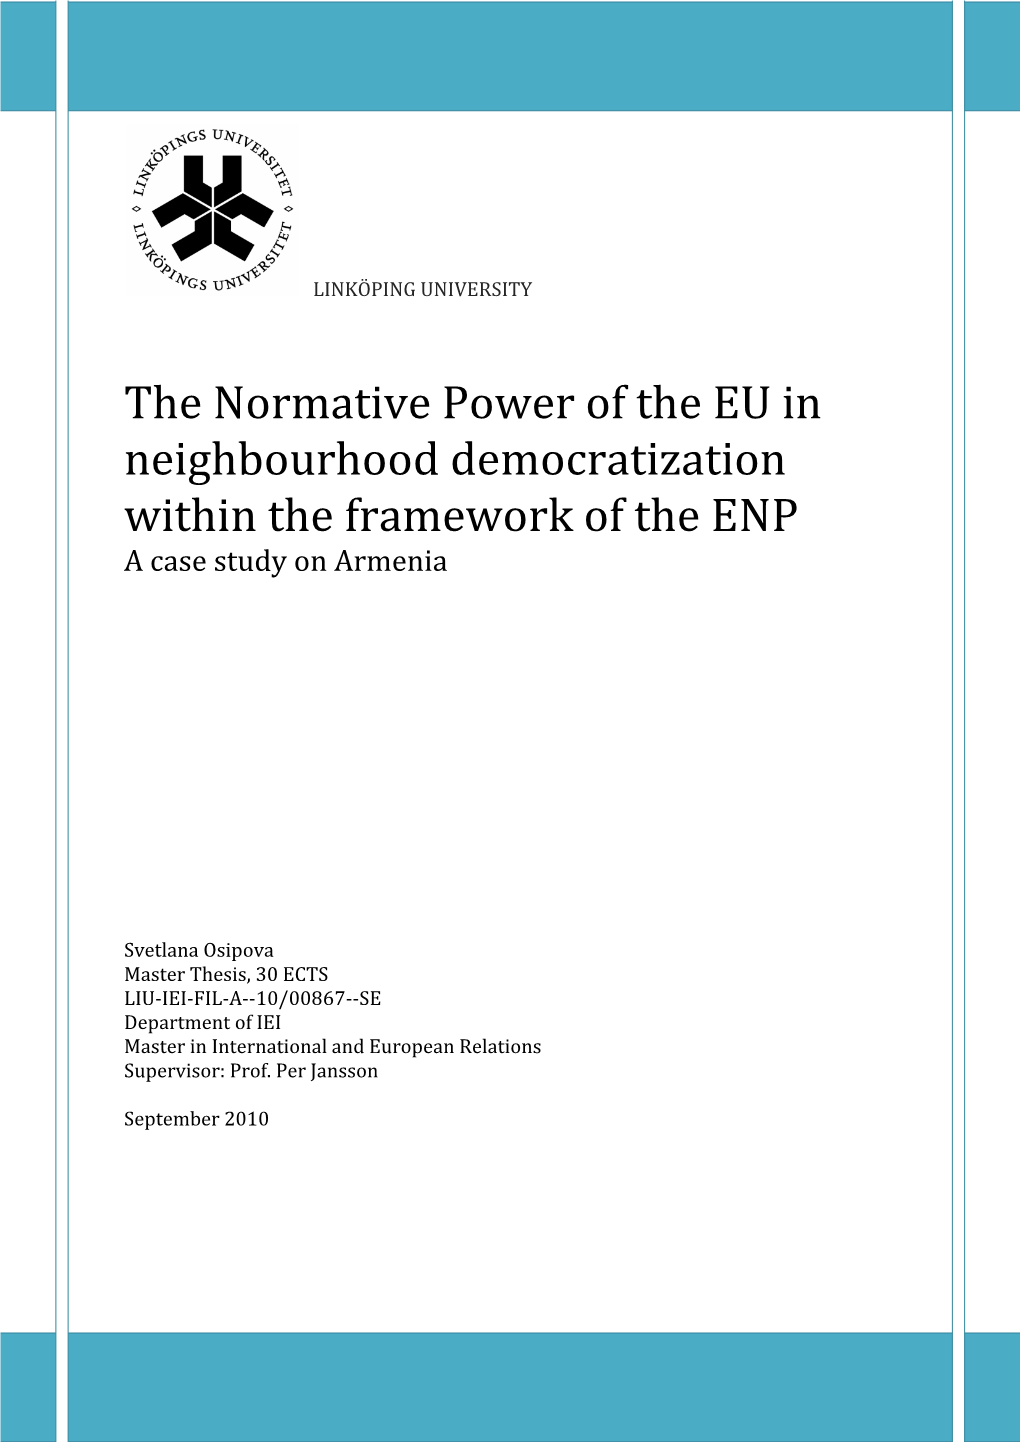 The Normative Power of the EU in Neighbourhood Democratization Within the Framework of the ENP a Case Study on Armenia